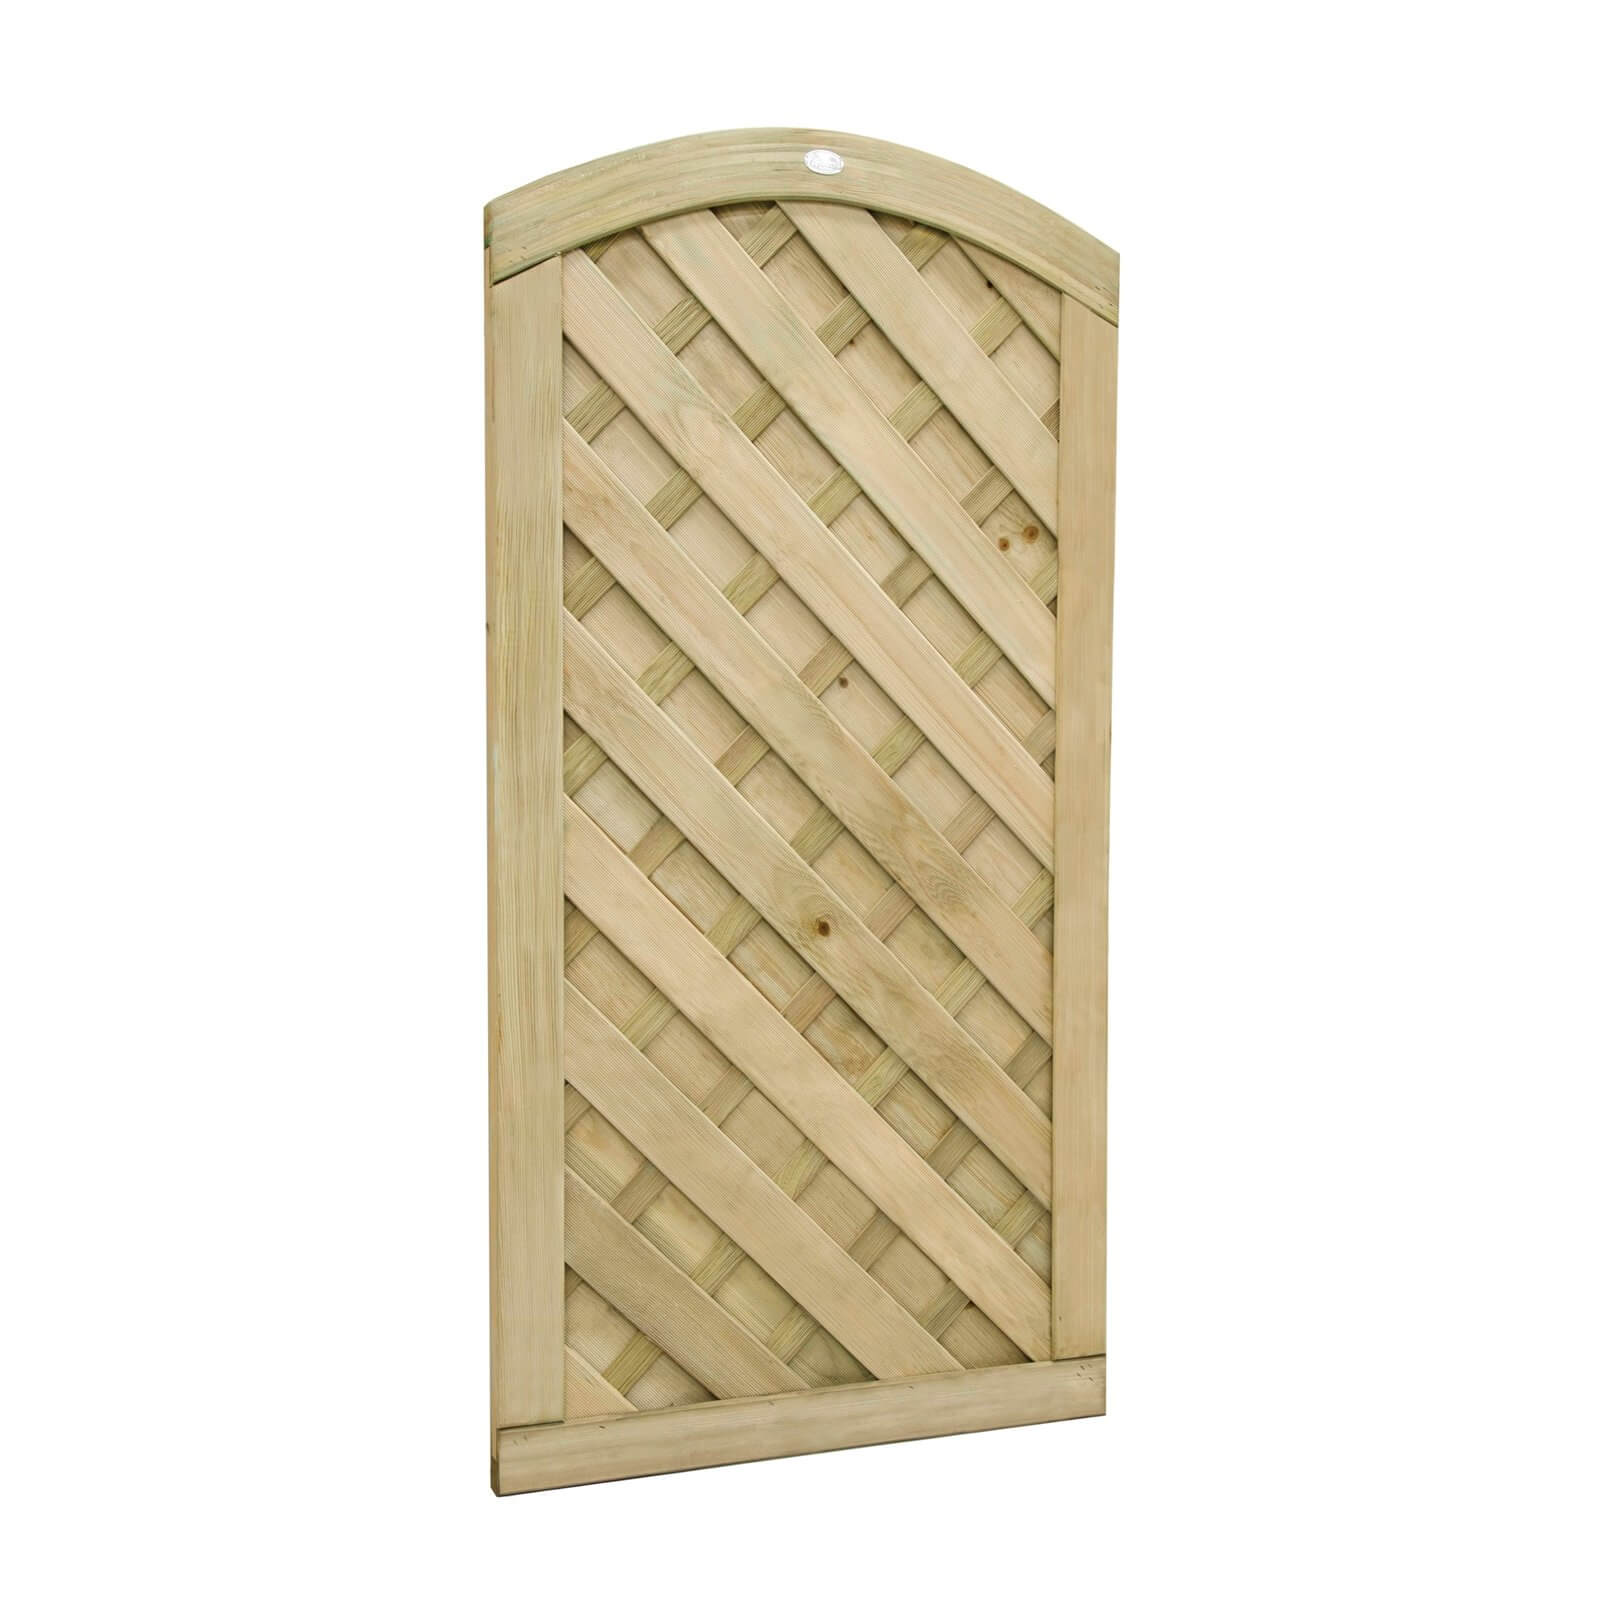 Europa Dome Gate - 6ft